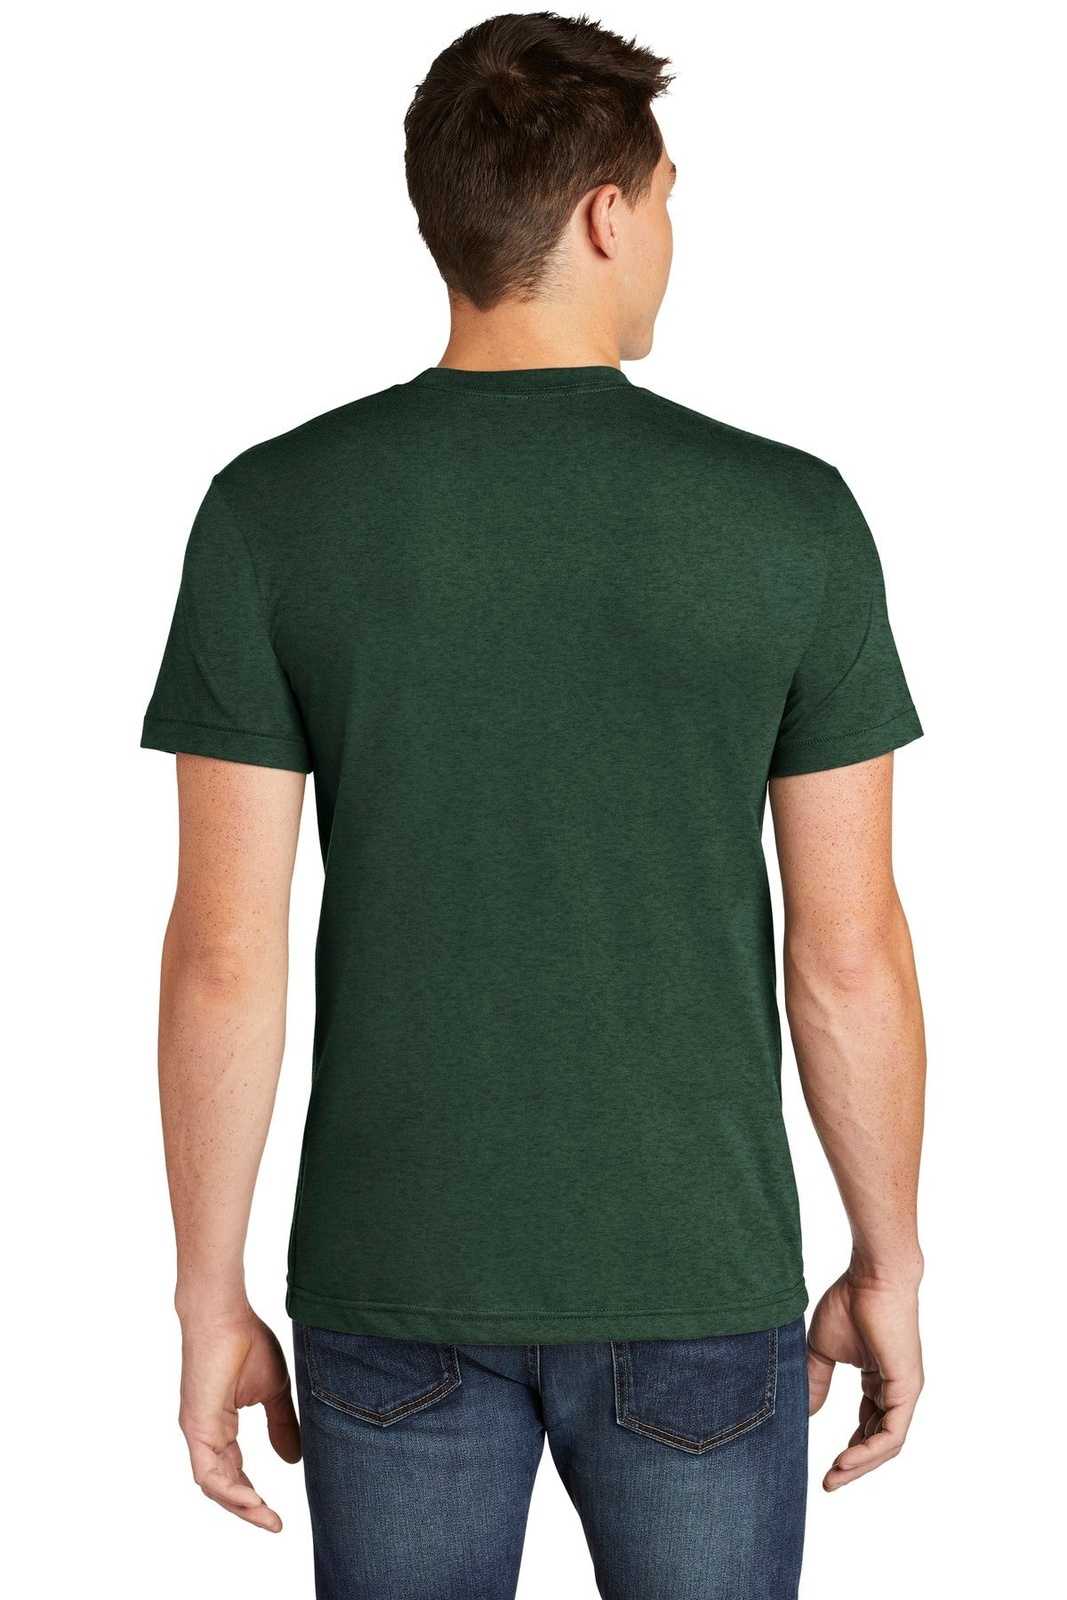 American Apparel BB401W Poly-Cotton T-Shirt - Heather Forest - HIT a Double